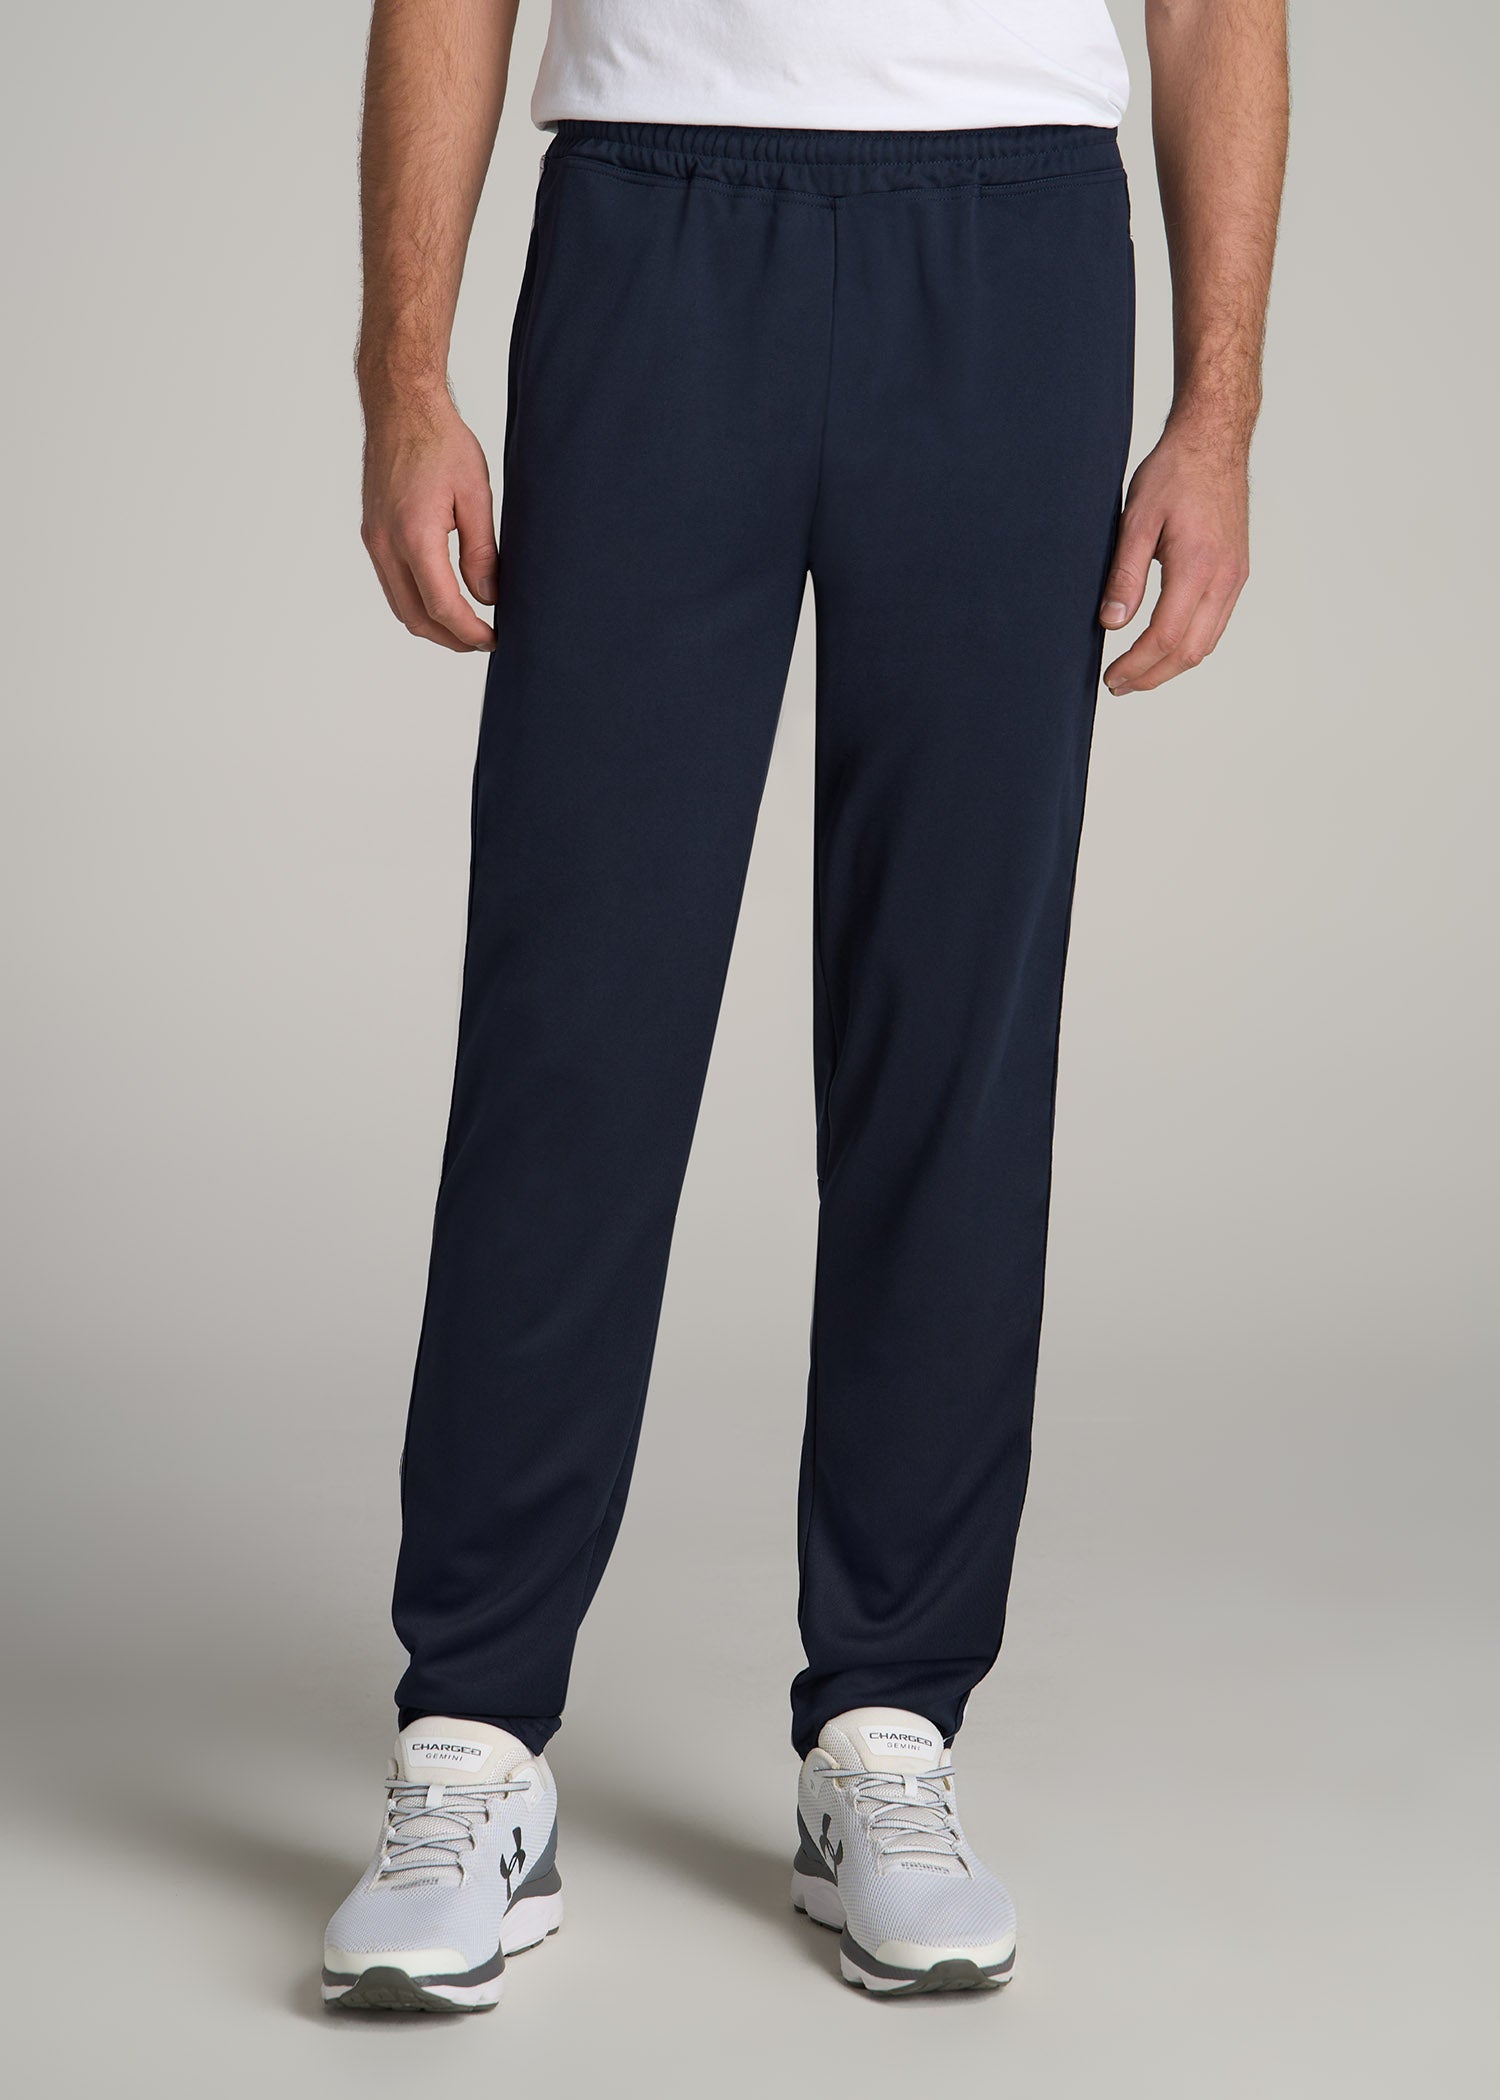 Navy Stripe Pant For Tall Men | American Tall